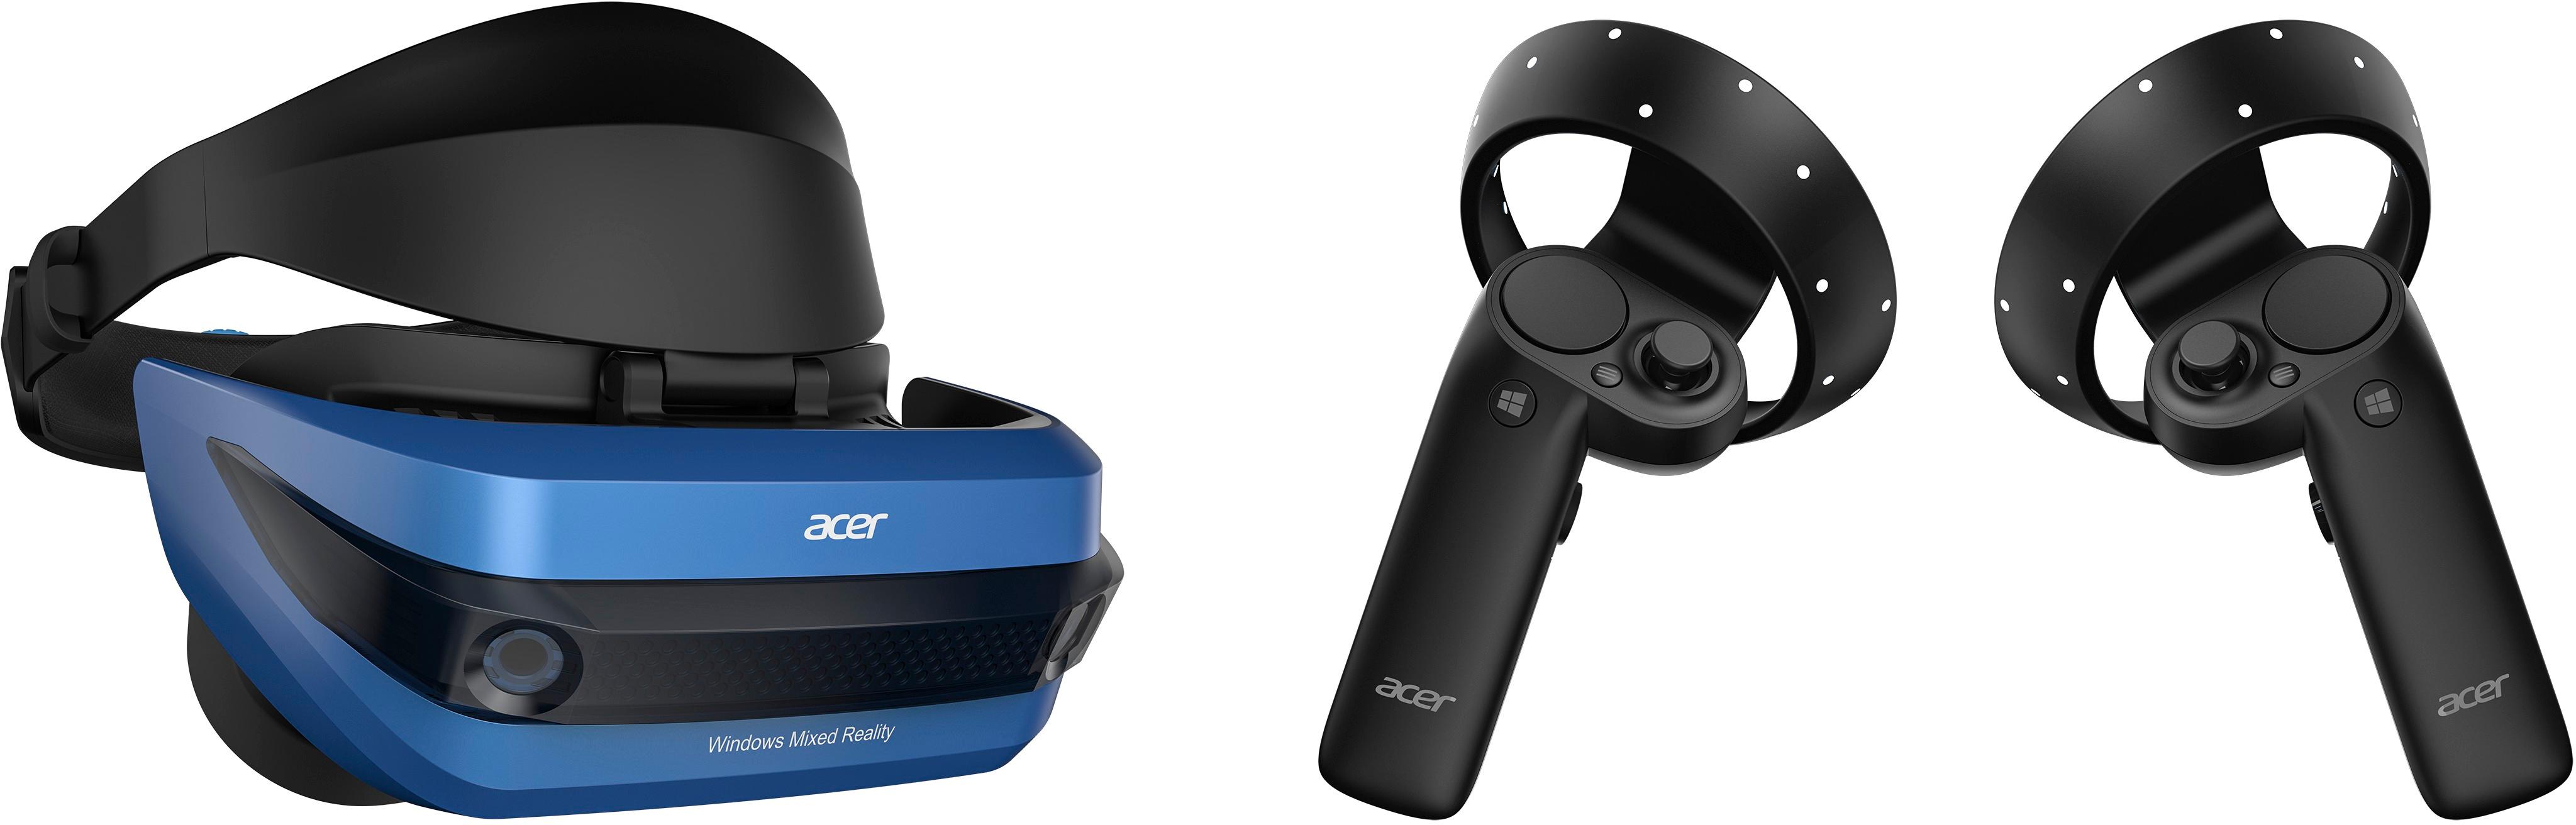 vr headset for pc with controllers